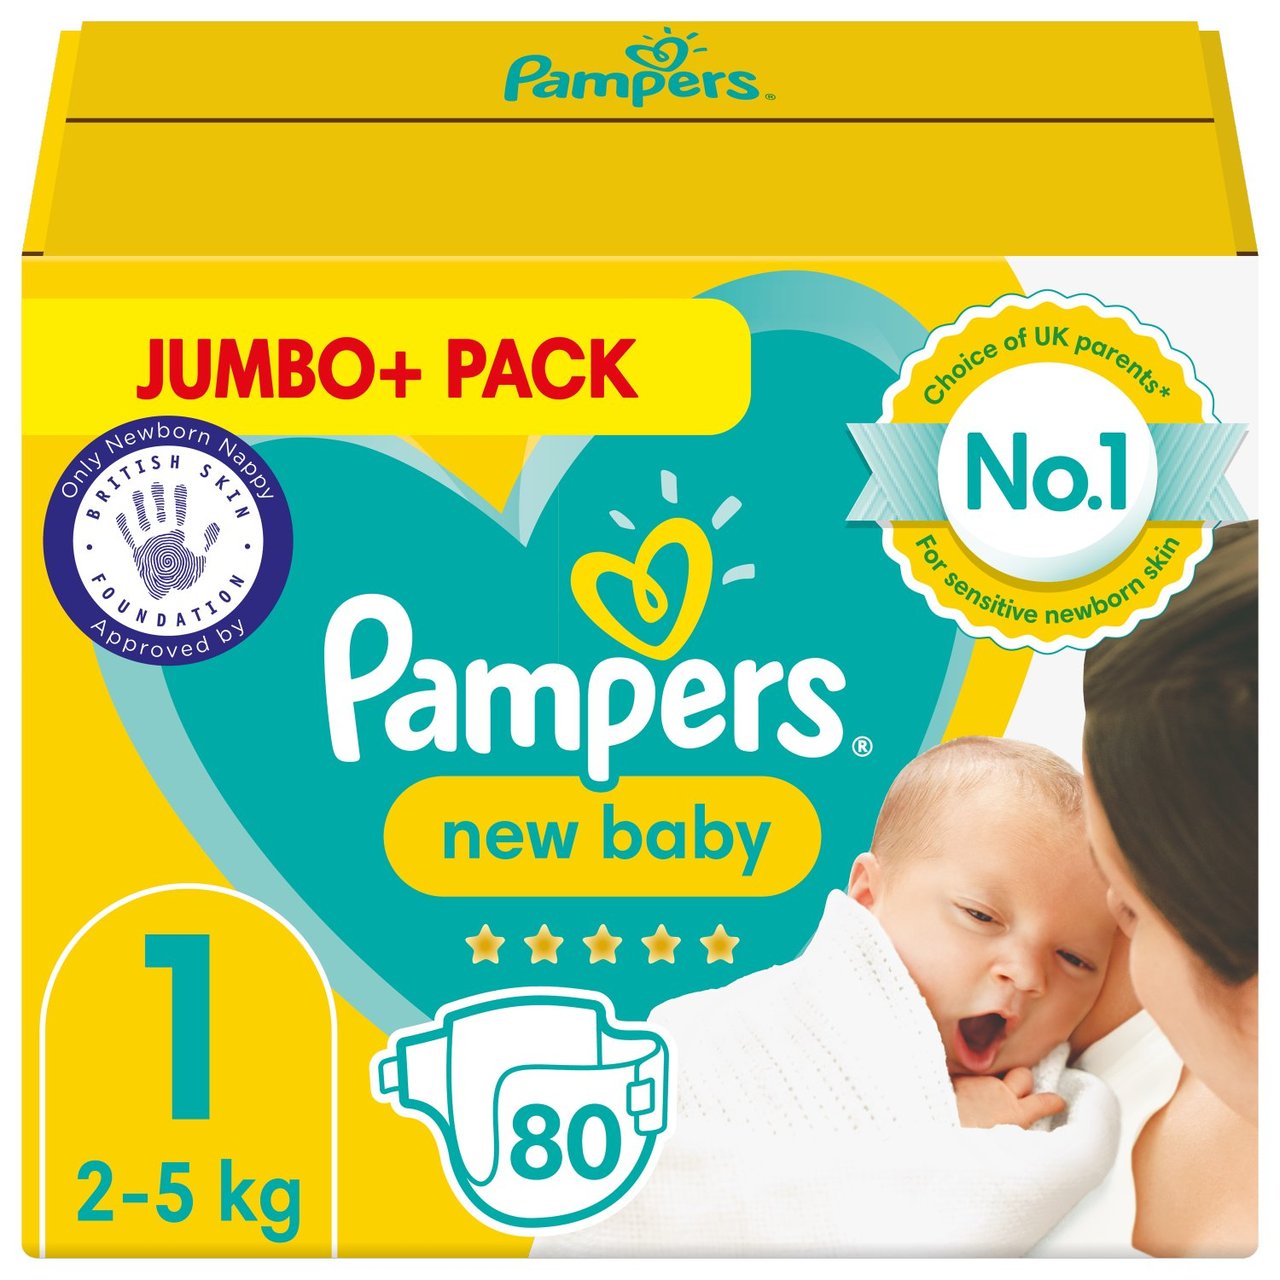 Pampers Premium Protection New Baby Size 1, 80 Nappies Jumbo+ Pack 80 per  pack - HelloSupermarket